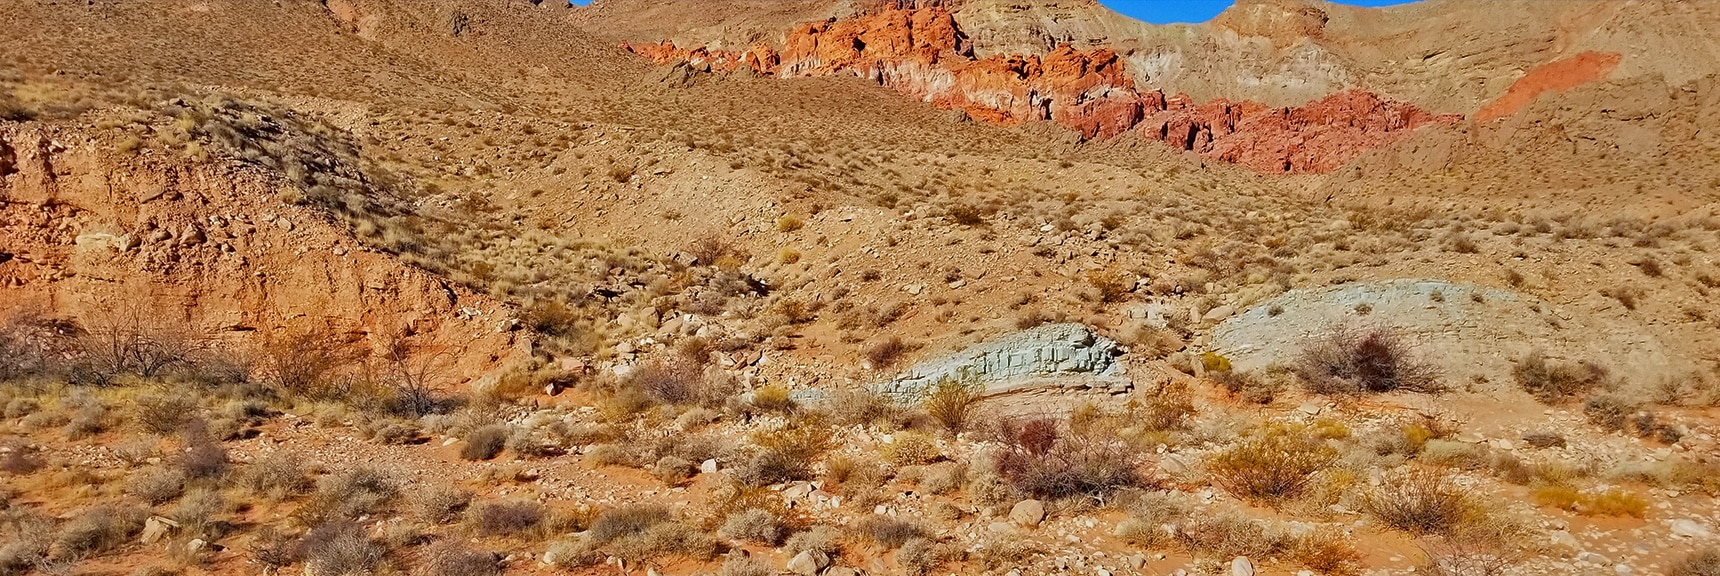 Trail Descends to the Wash Leading to Bowl of Fire | Bowl of Fire, Lake Mead National Recreation Area, Nevada